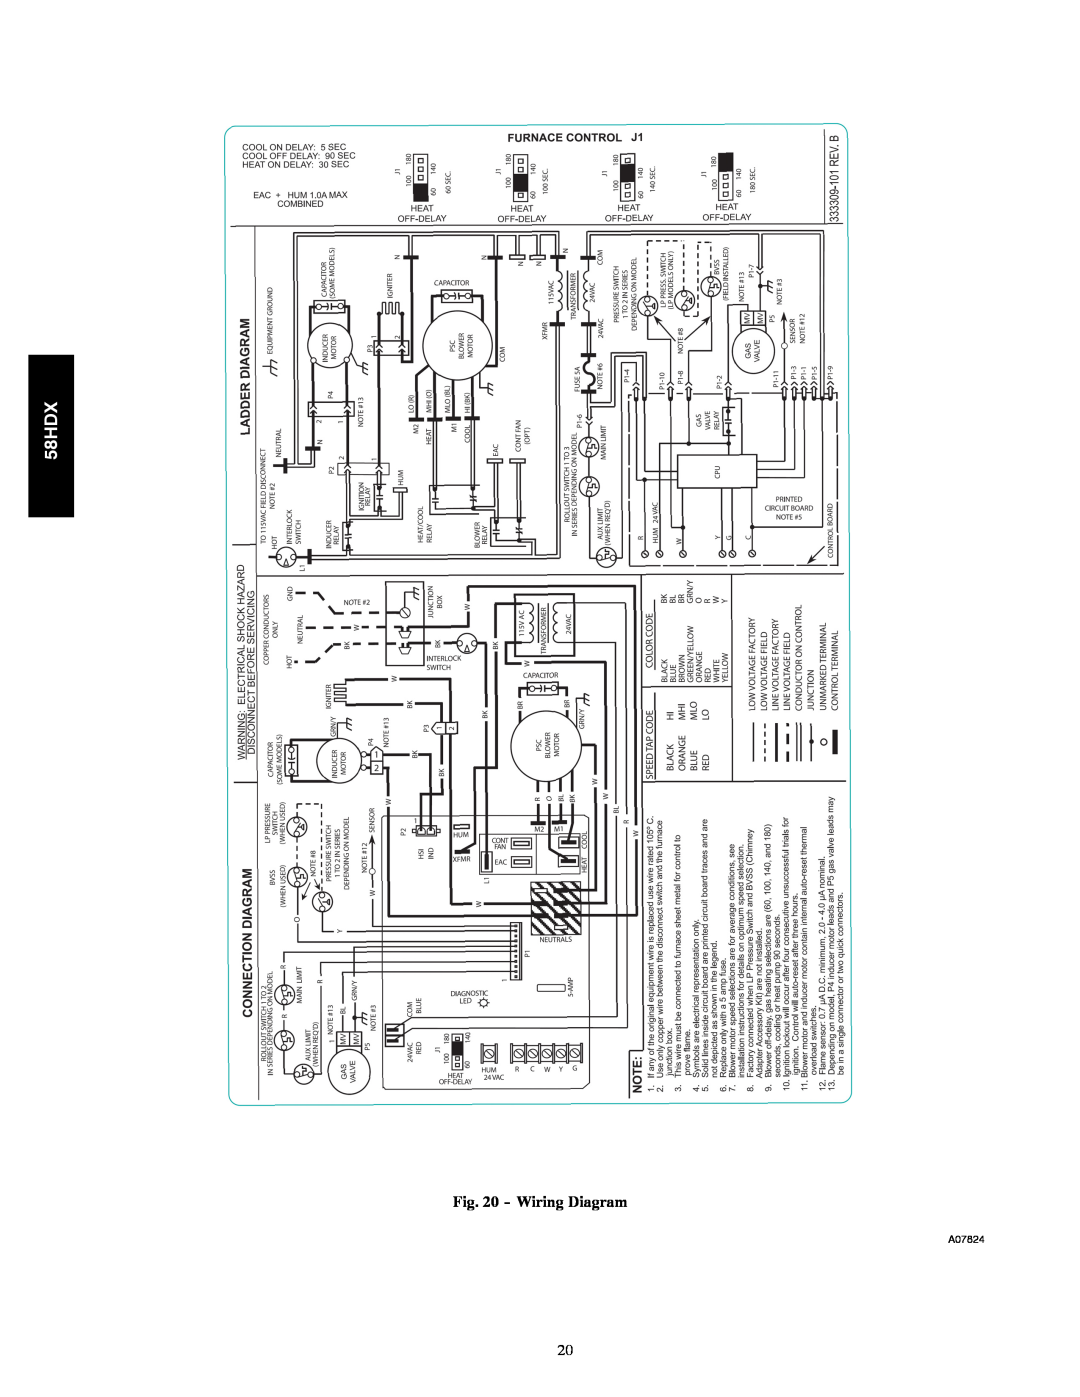 Carrier 58HDX instruction manual Wiring Diagram, A07824 